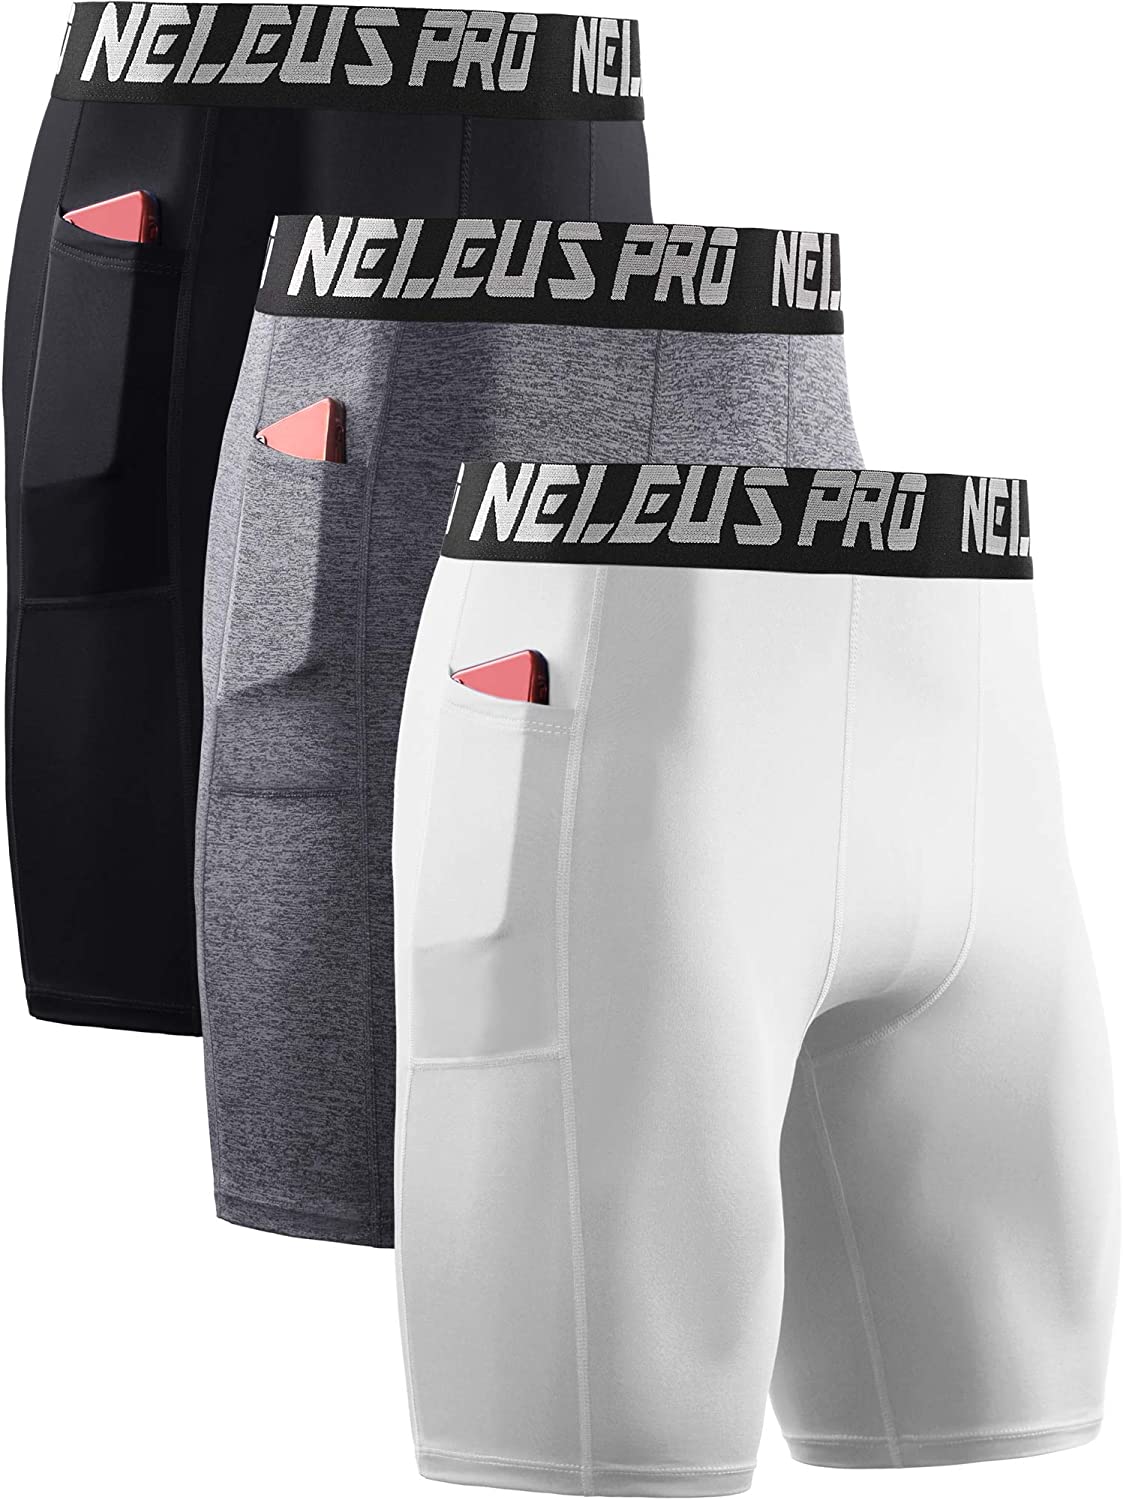 Neleus Womens 3 Pack Dry Fit Compression Running Shorts with a Pocket 